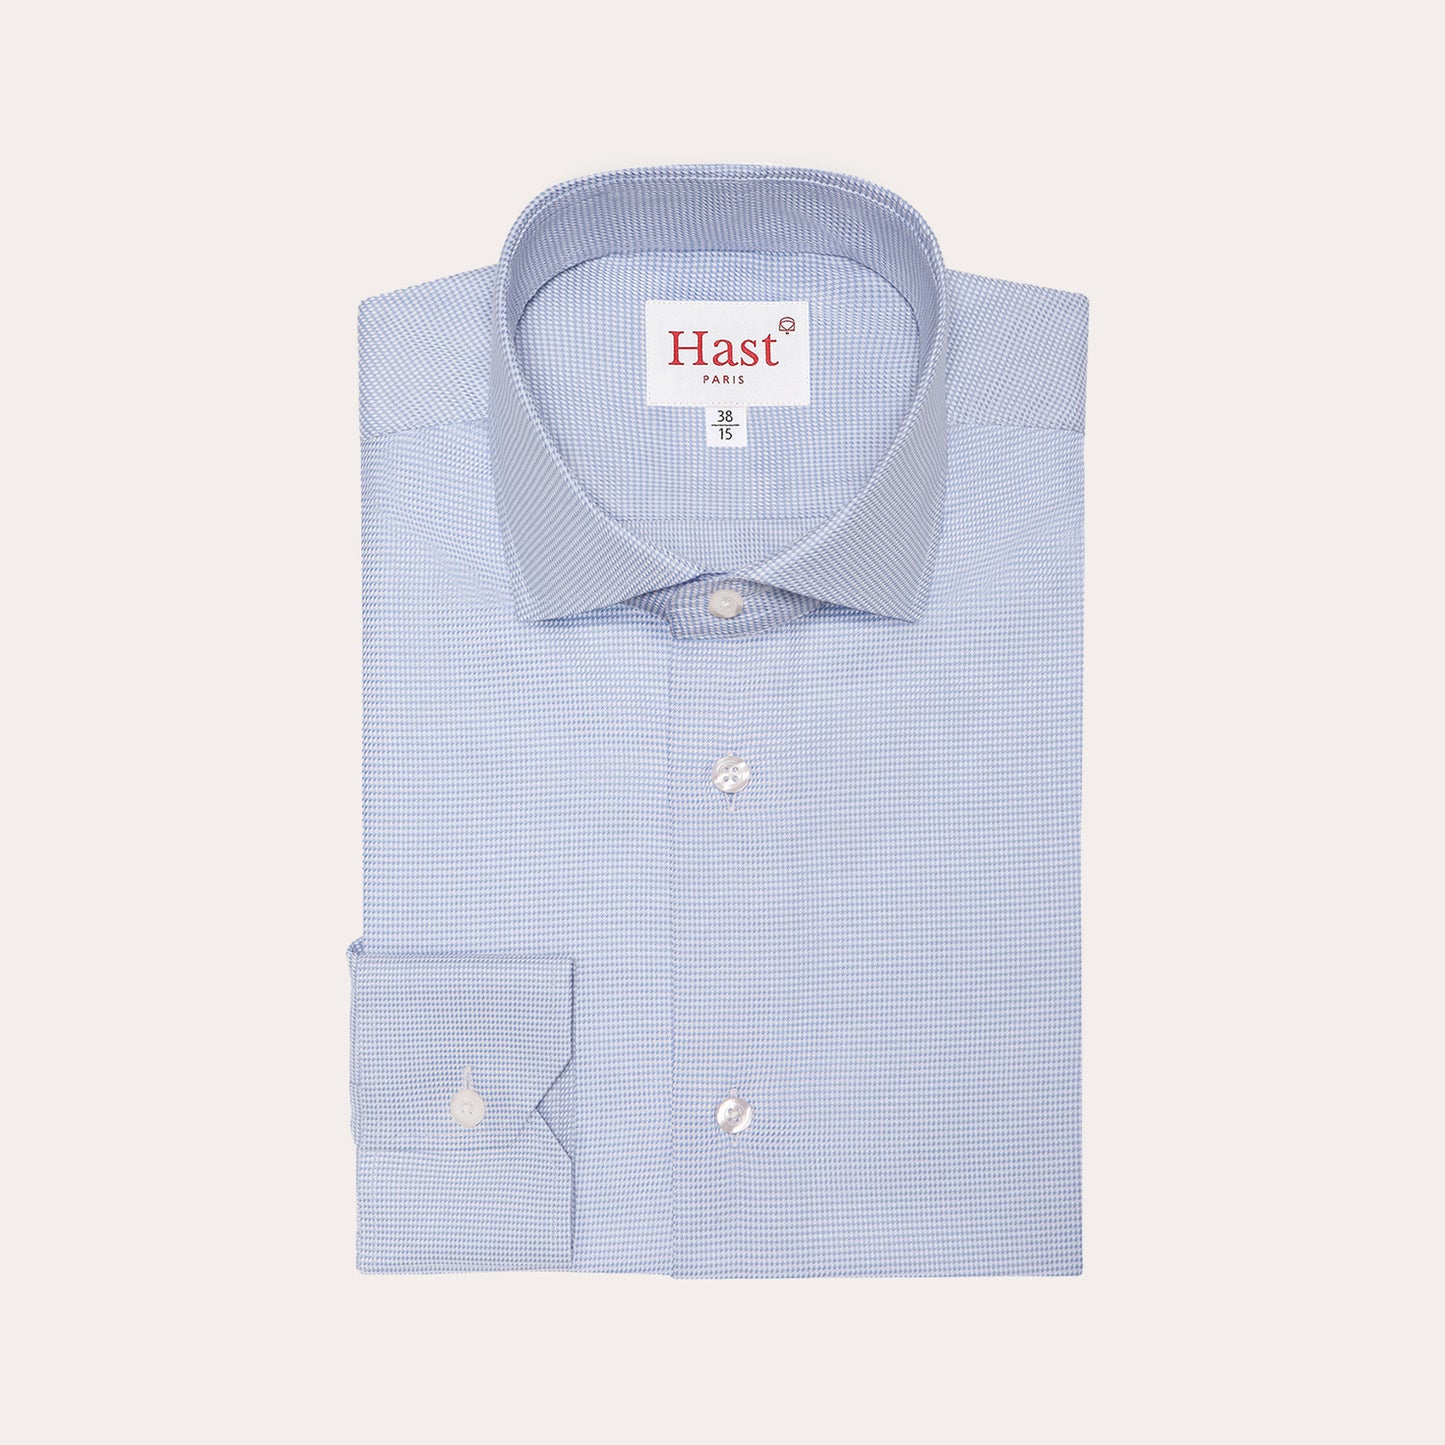 Fitted shirt in blue double-twisted houndstooth Oxford